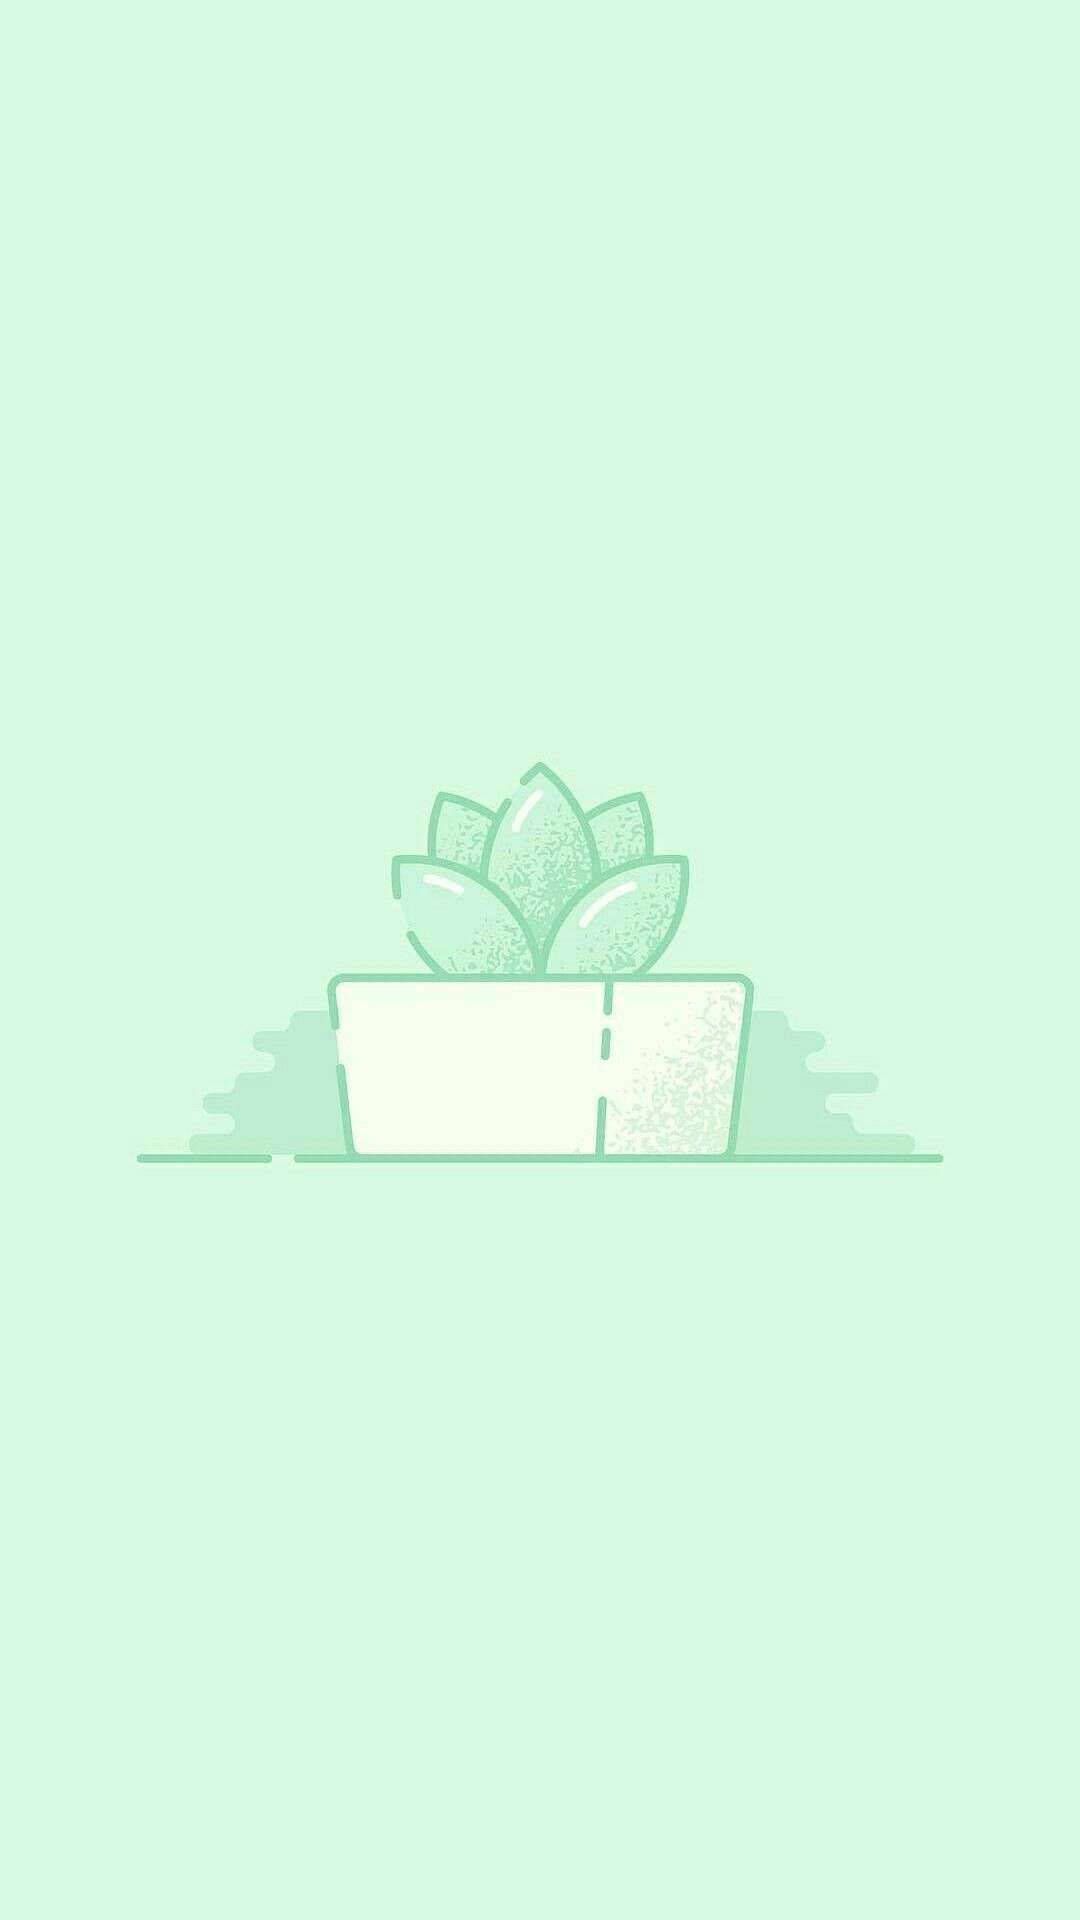 A green plant in the shape of an icon - Light green, soft green, succulent